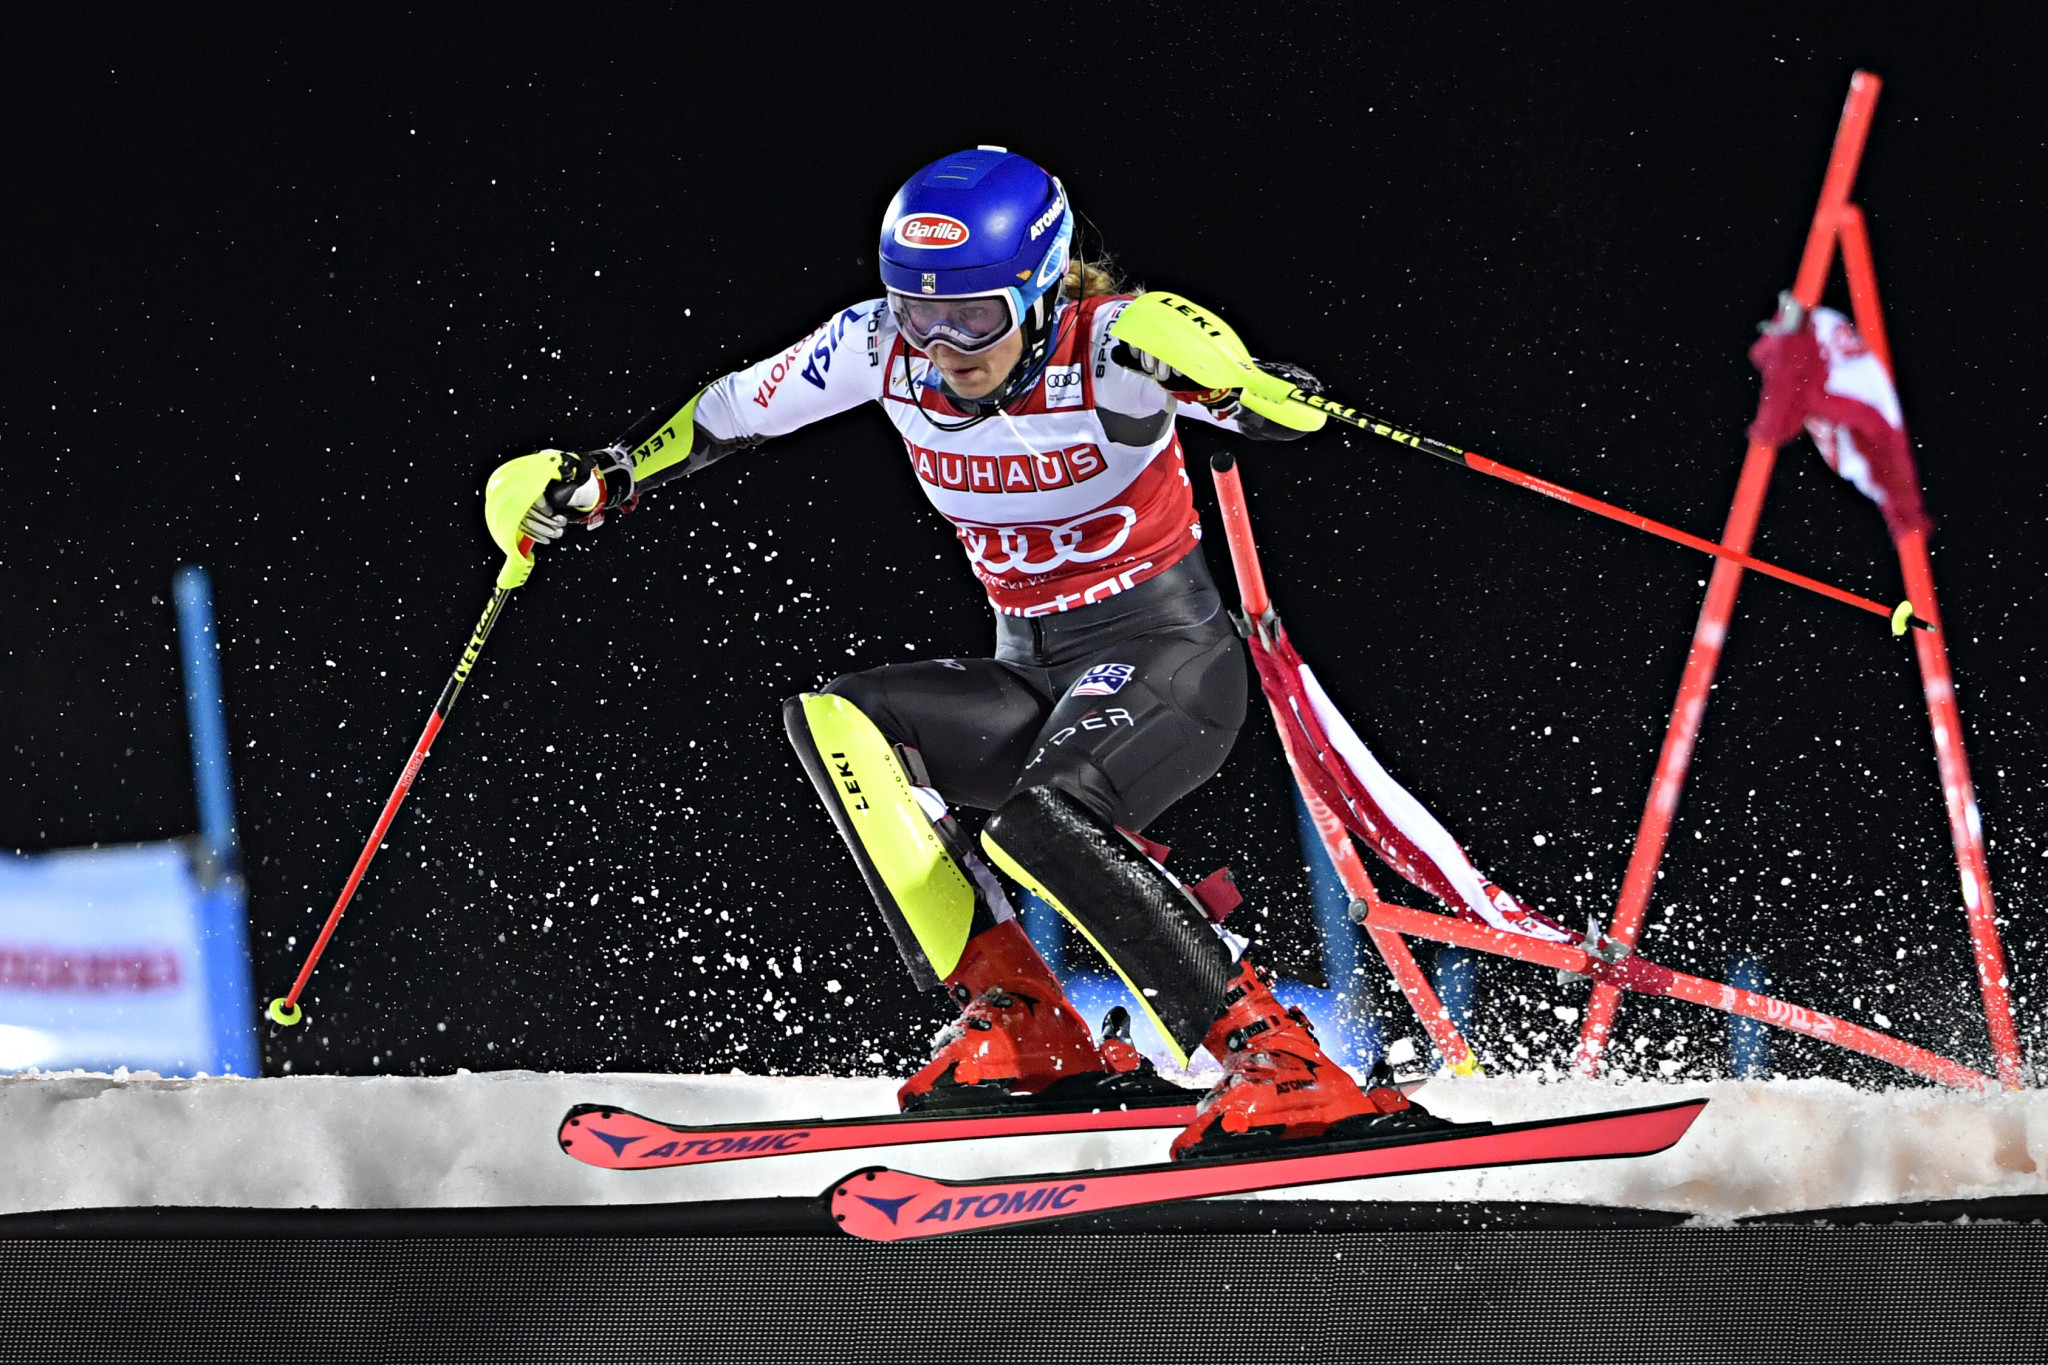 World champion Shiffrin shines in slalom again at FIS Alpine Skiing World Cup in Stockholm